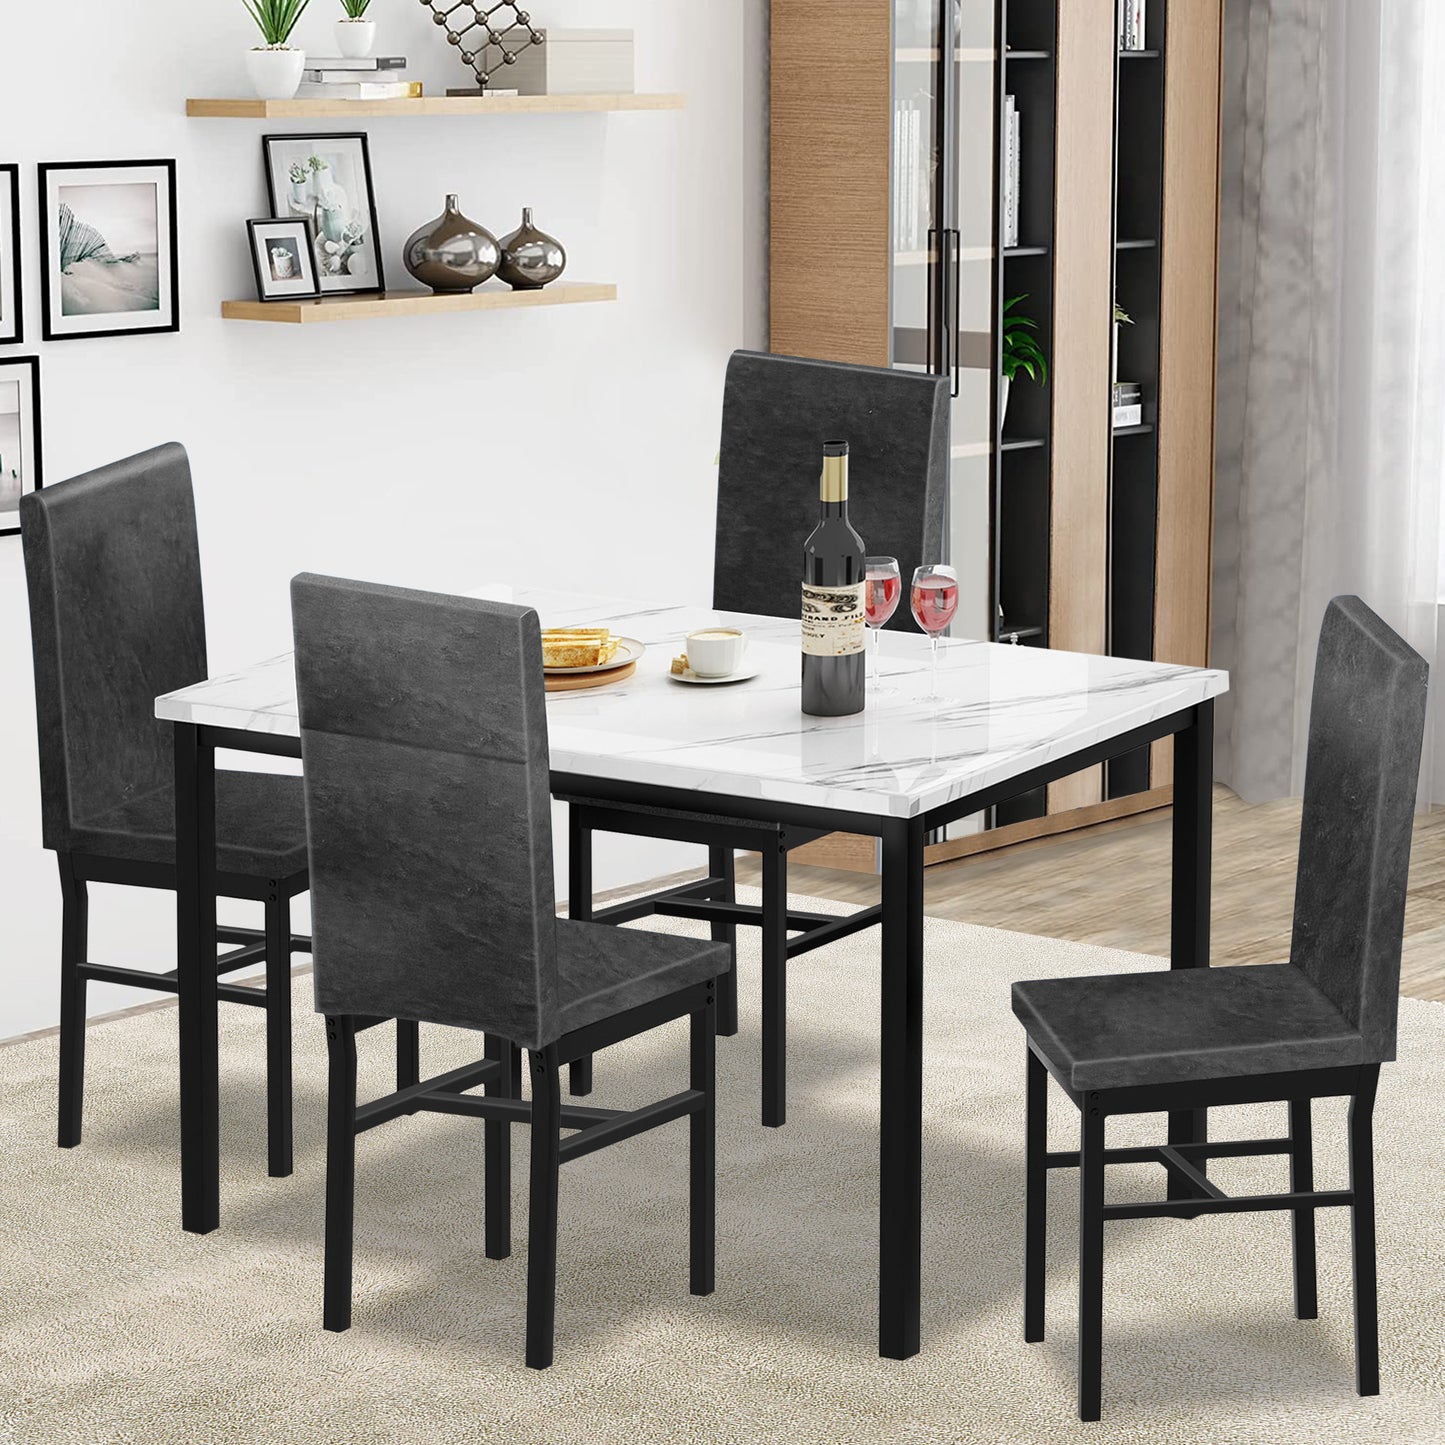 5 Piece Dining Table Set, Kitchen Dining Table and Chairs Set for 4, Modern Marble Table and 4 PU Leather Upholstered Chairs, Home Dining Set for Small Space, Breakfast Nook, White, D8529